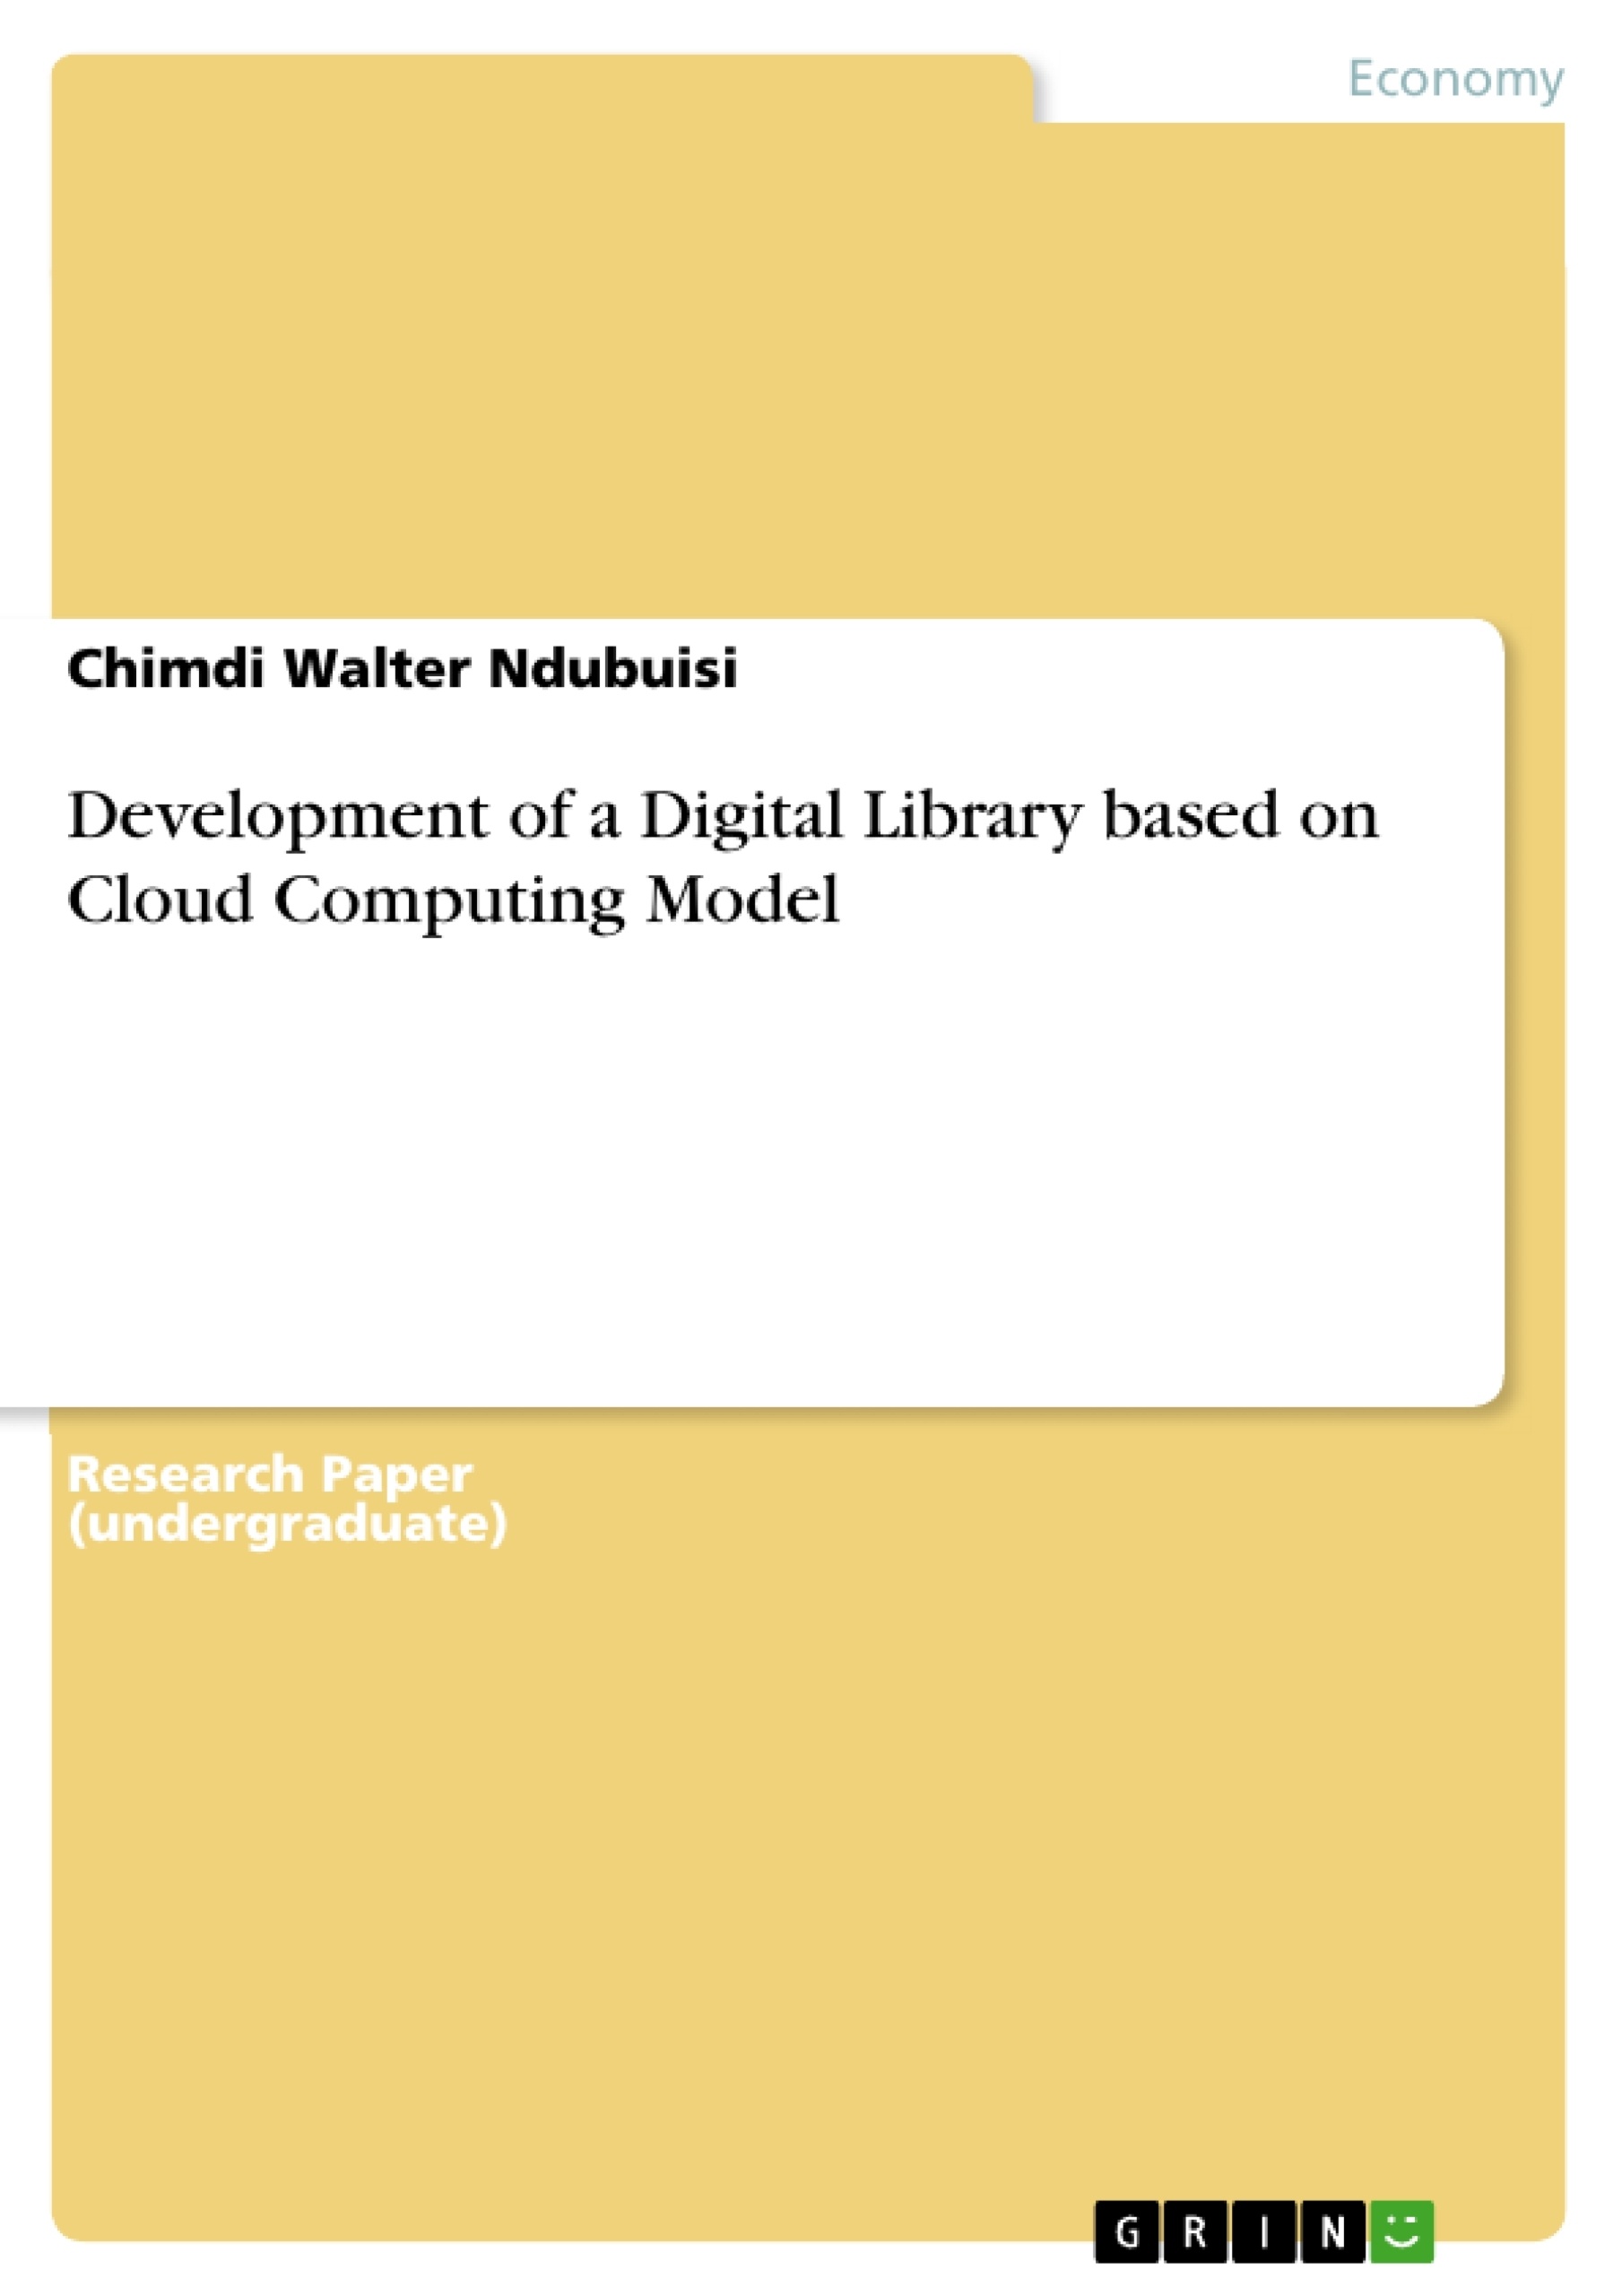 Title: Development of a Digital Library based on Cloud Computing Model